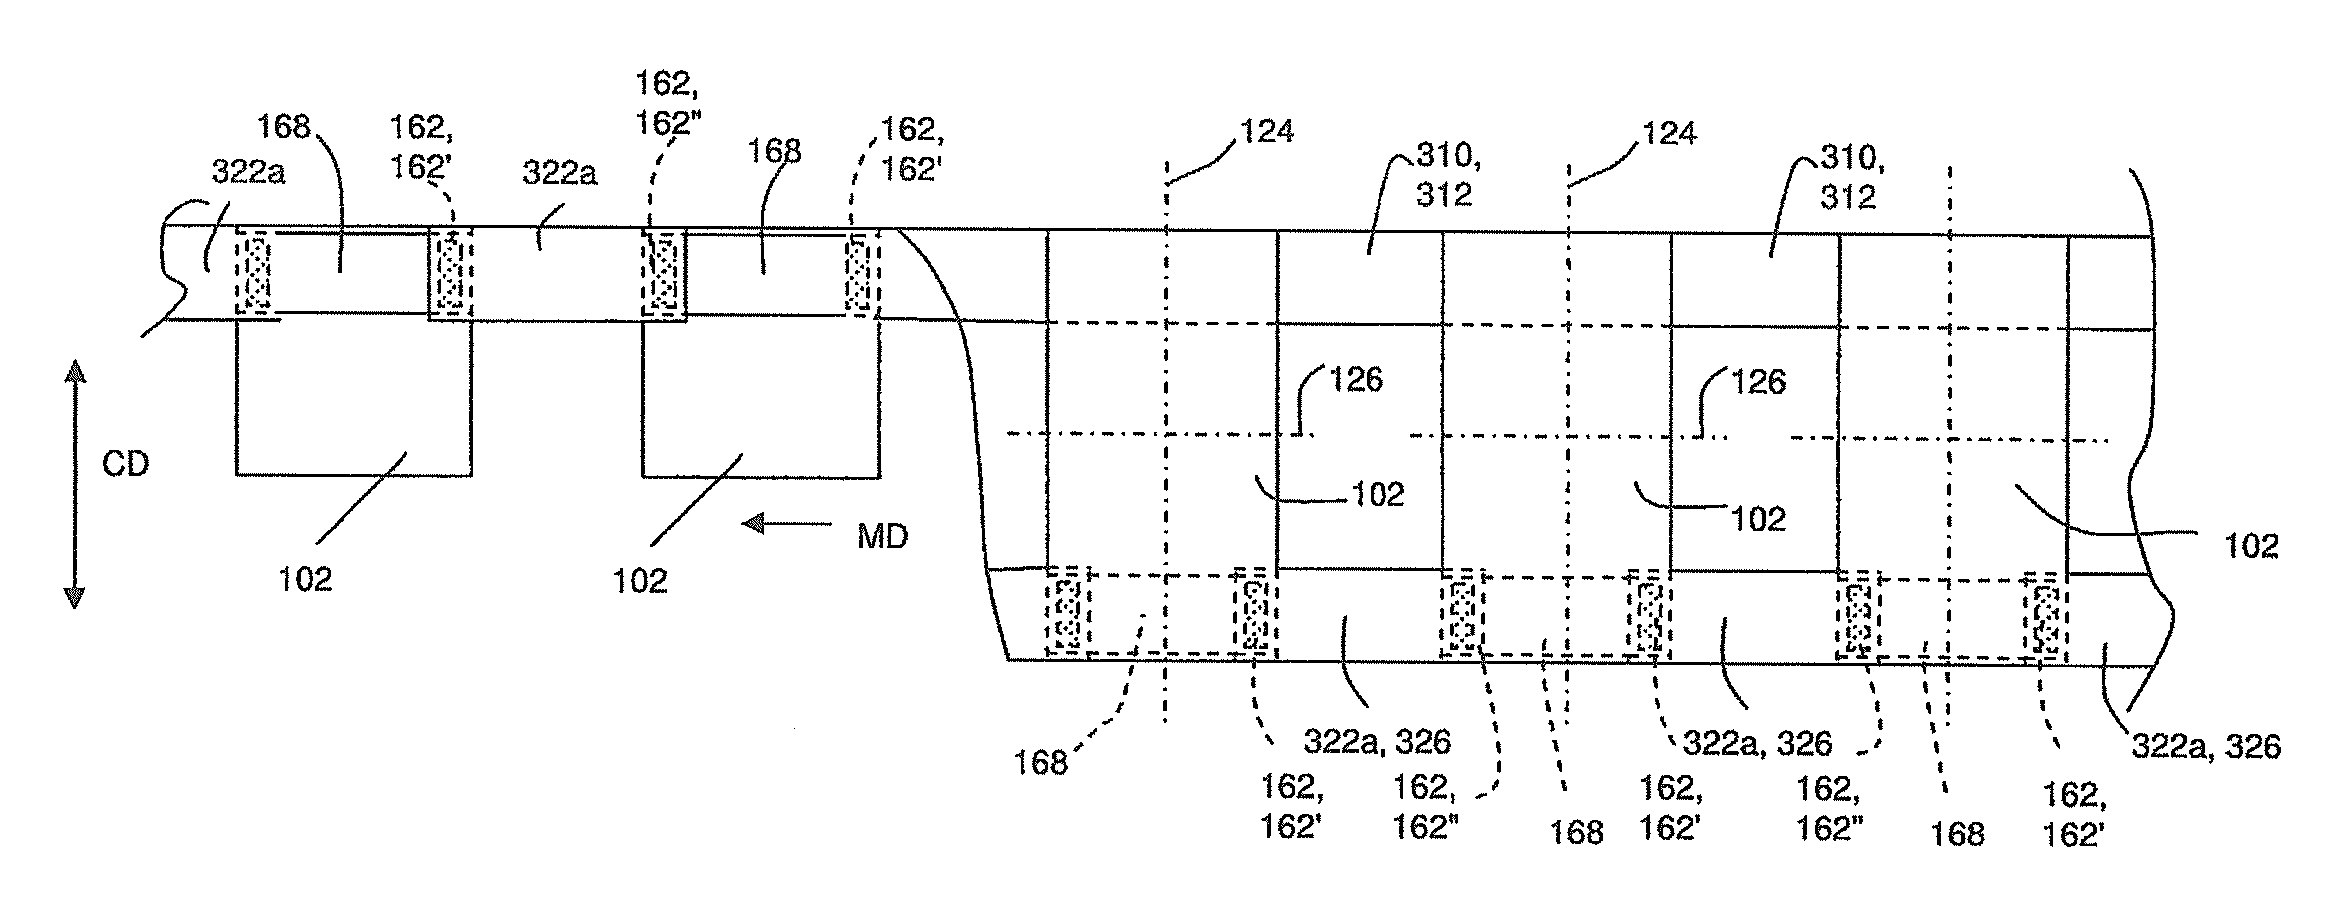 Method of Making Prefastened Refastenable Disposable Absorbent Articles